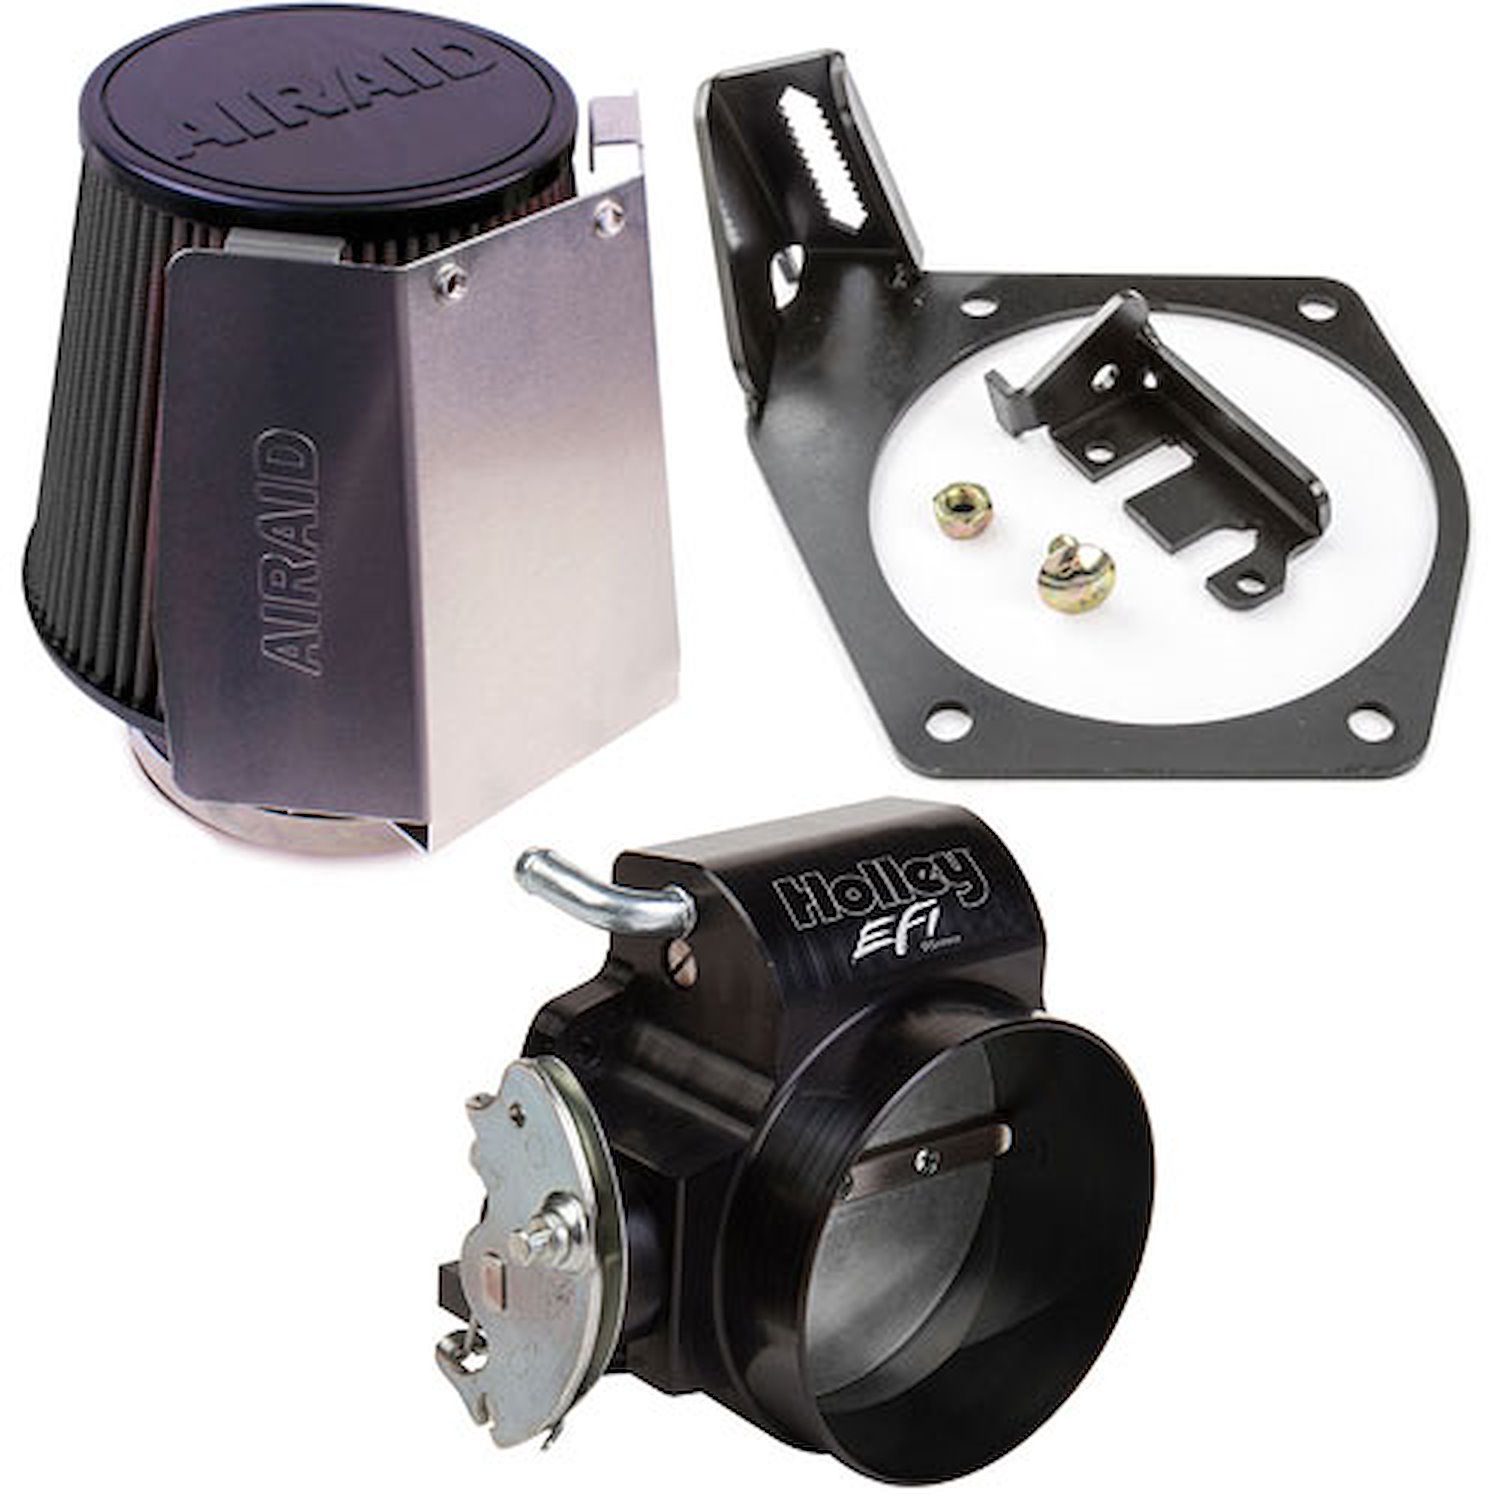 LS Throttle Body Intake Kit Includes: Airaid LS Engine Shielded Air Filter (Black)